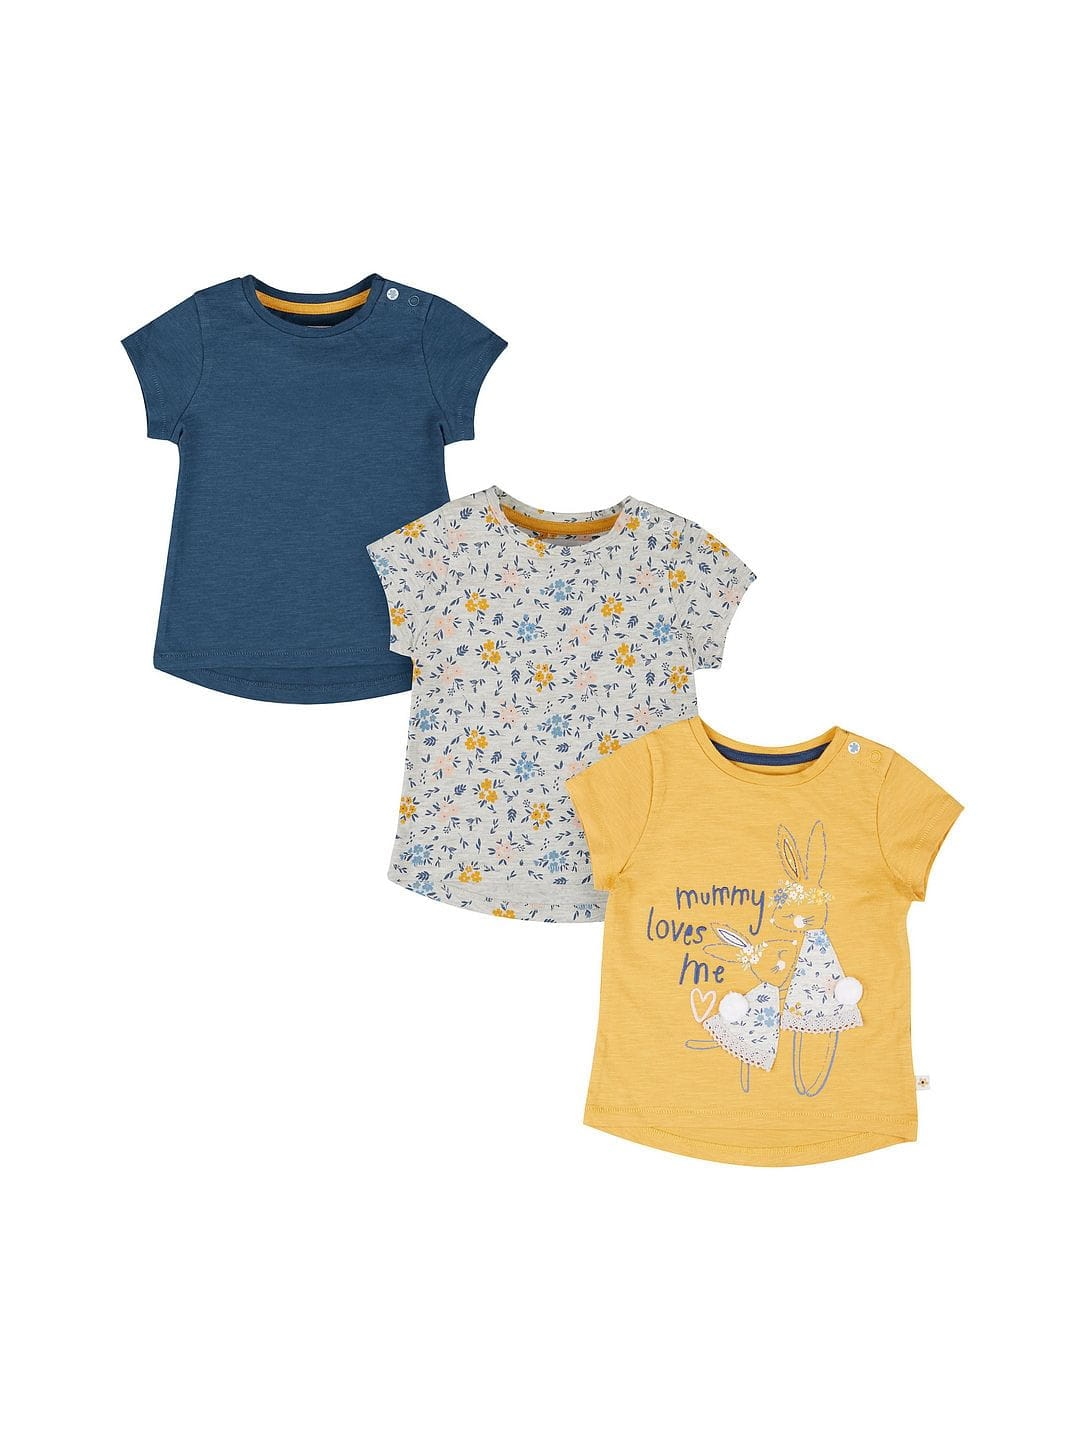 Mothercare | Mummy Loves Me T-Shirts - 3 Pack 0